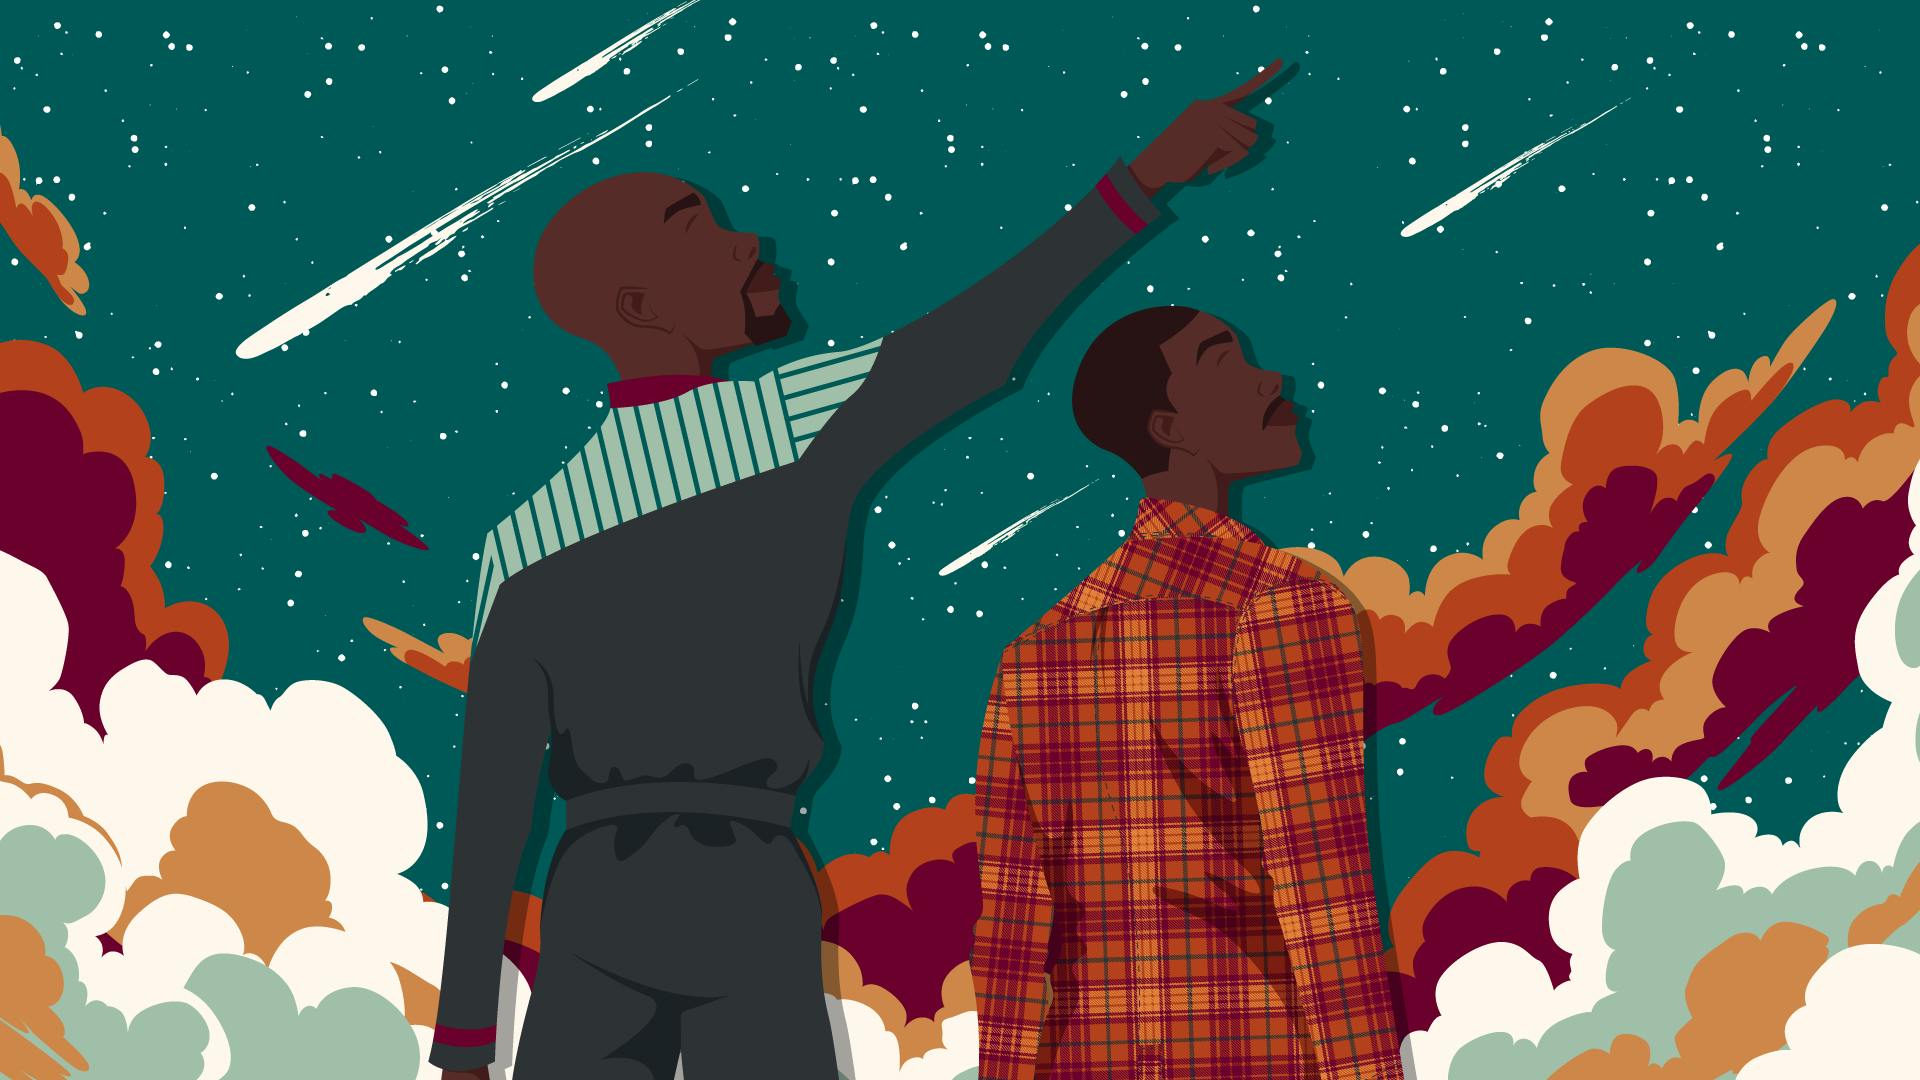 Graphic illustration of Captain Sisko pointing towards the sky as the Fifteenth Doctor's gaze follows his direction